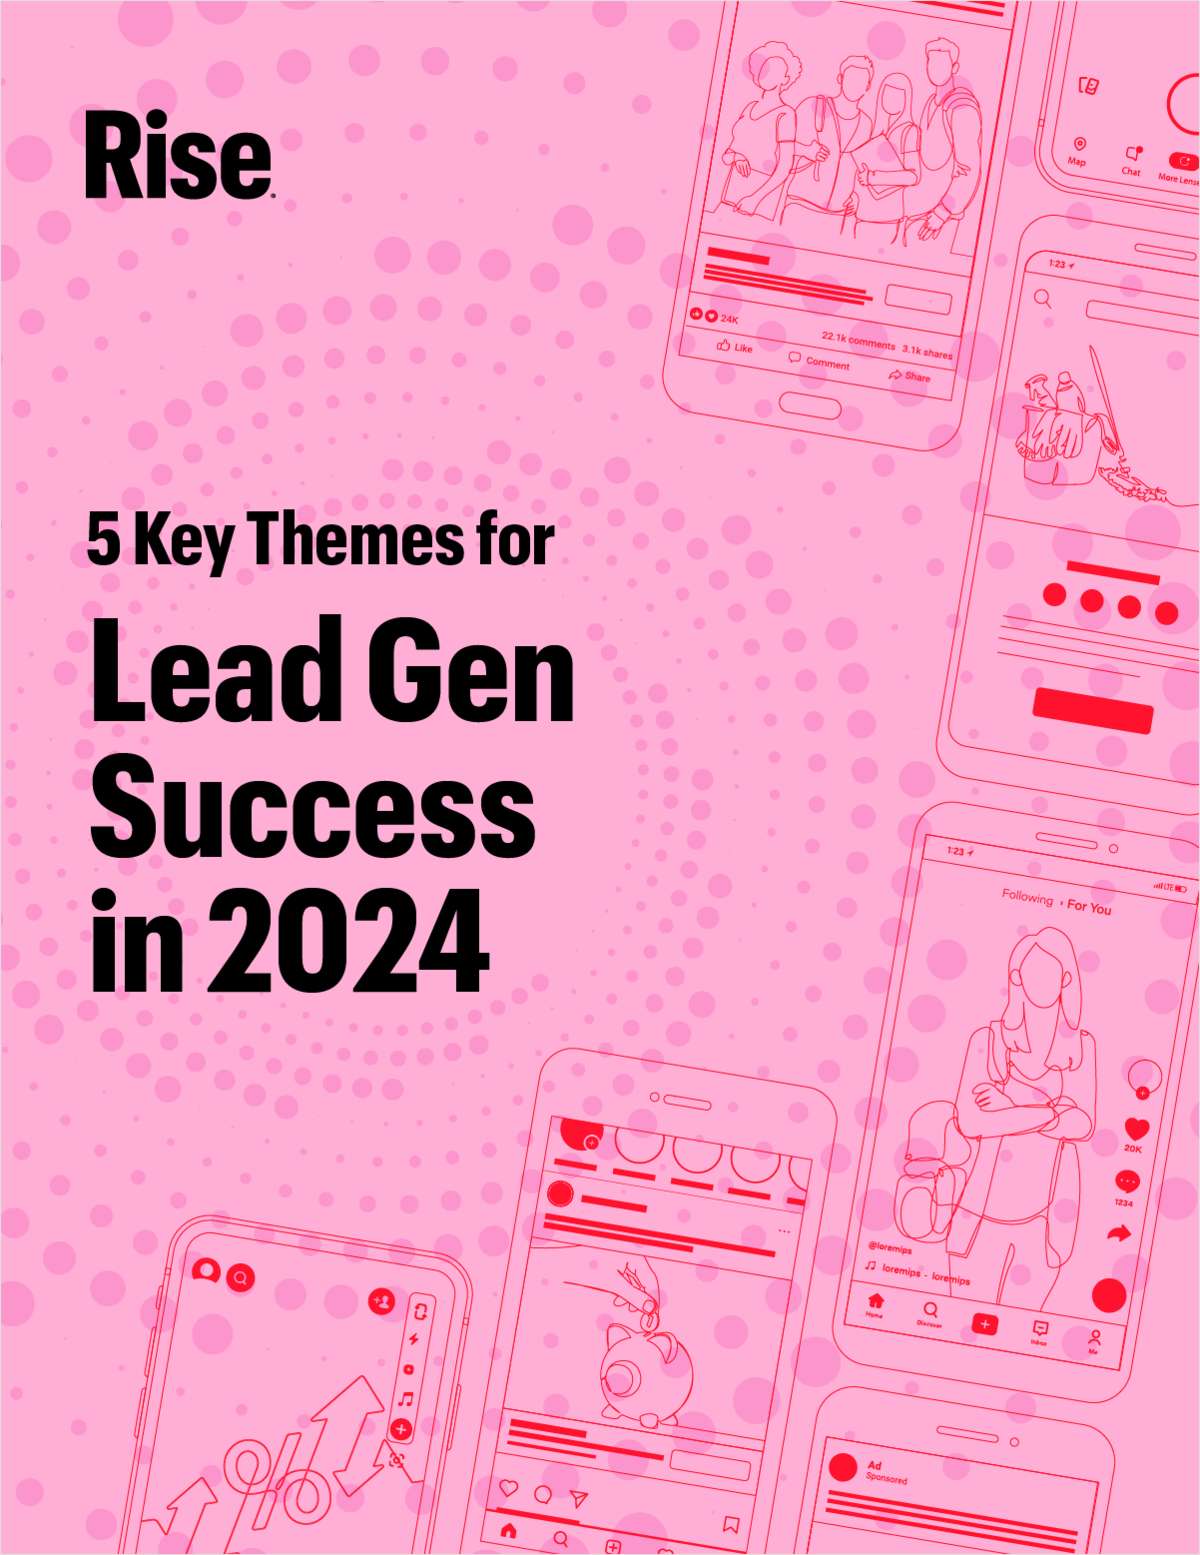 5 Key Themes for Lead Gen Success in 2024